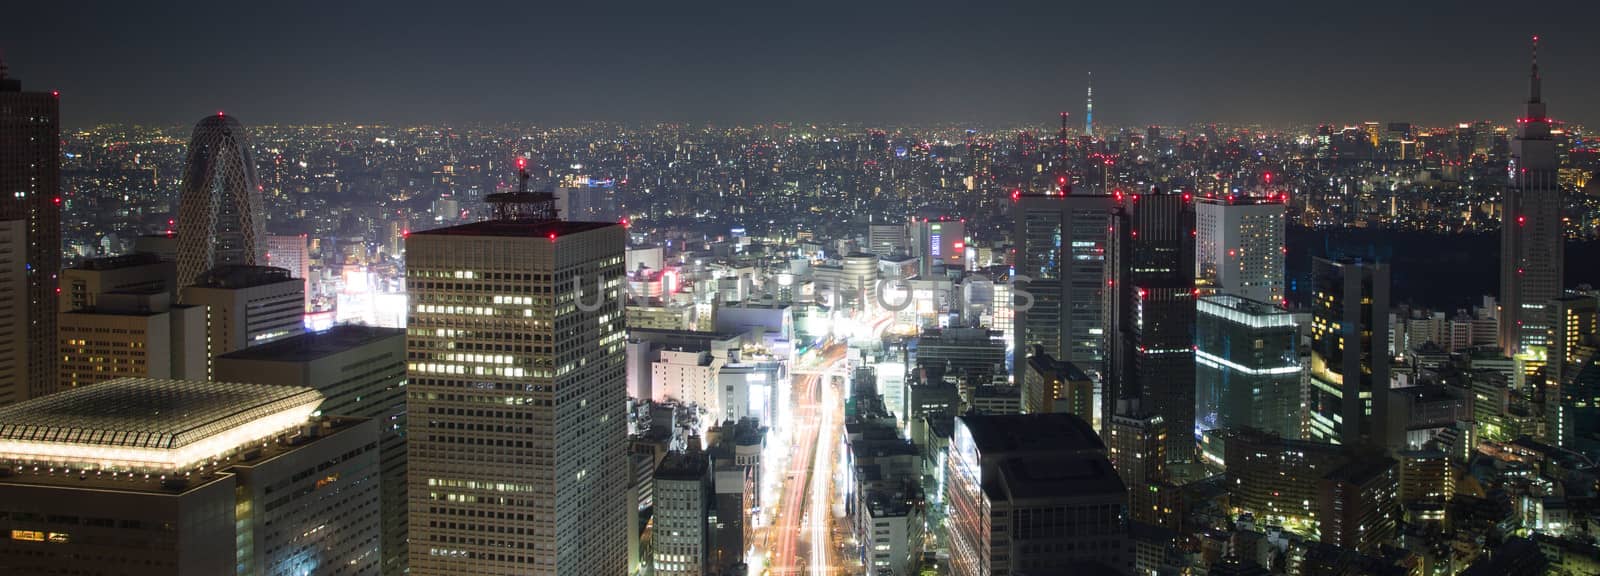 Tokyo by Night by watchtheworld